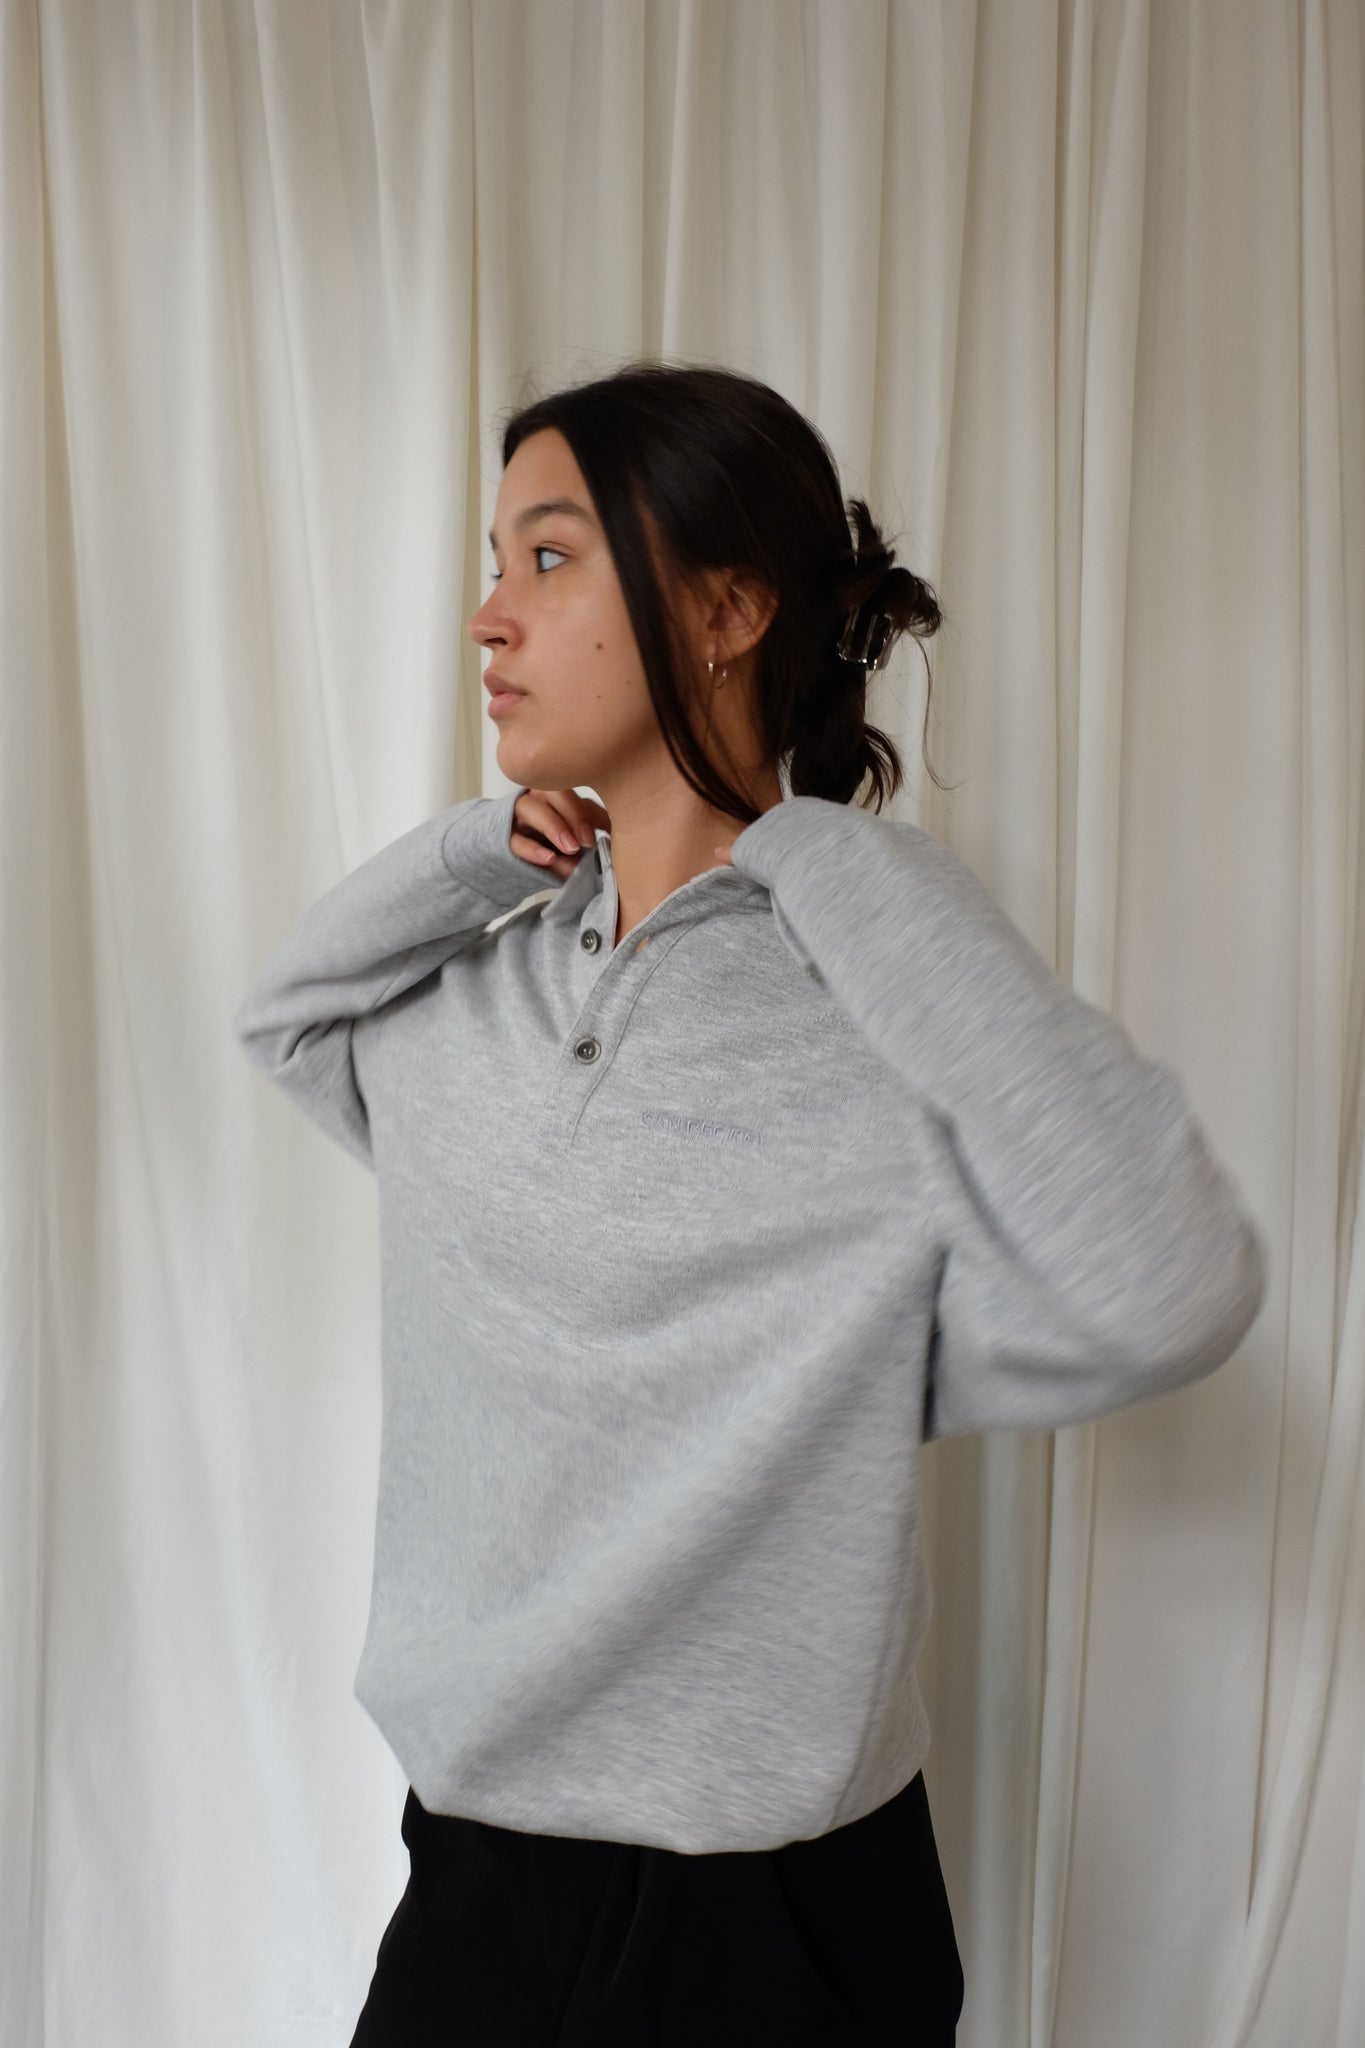 POLO SWEATER IN GREY BY CAN PEP REY - BEYOND STUDIOS